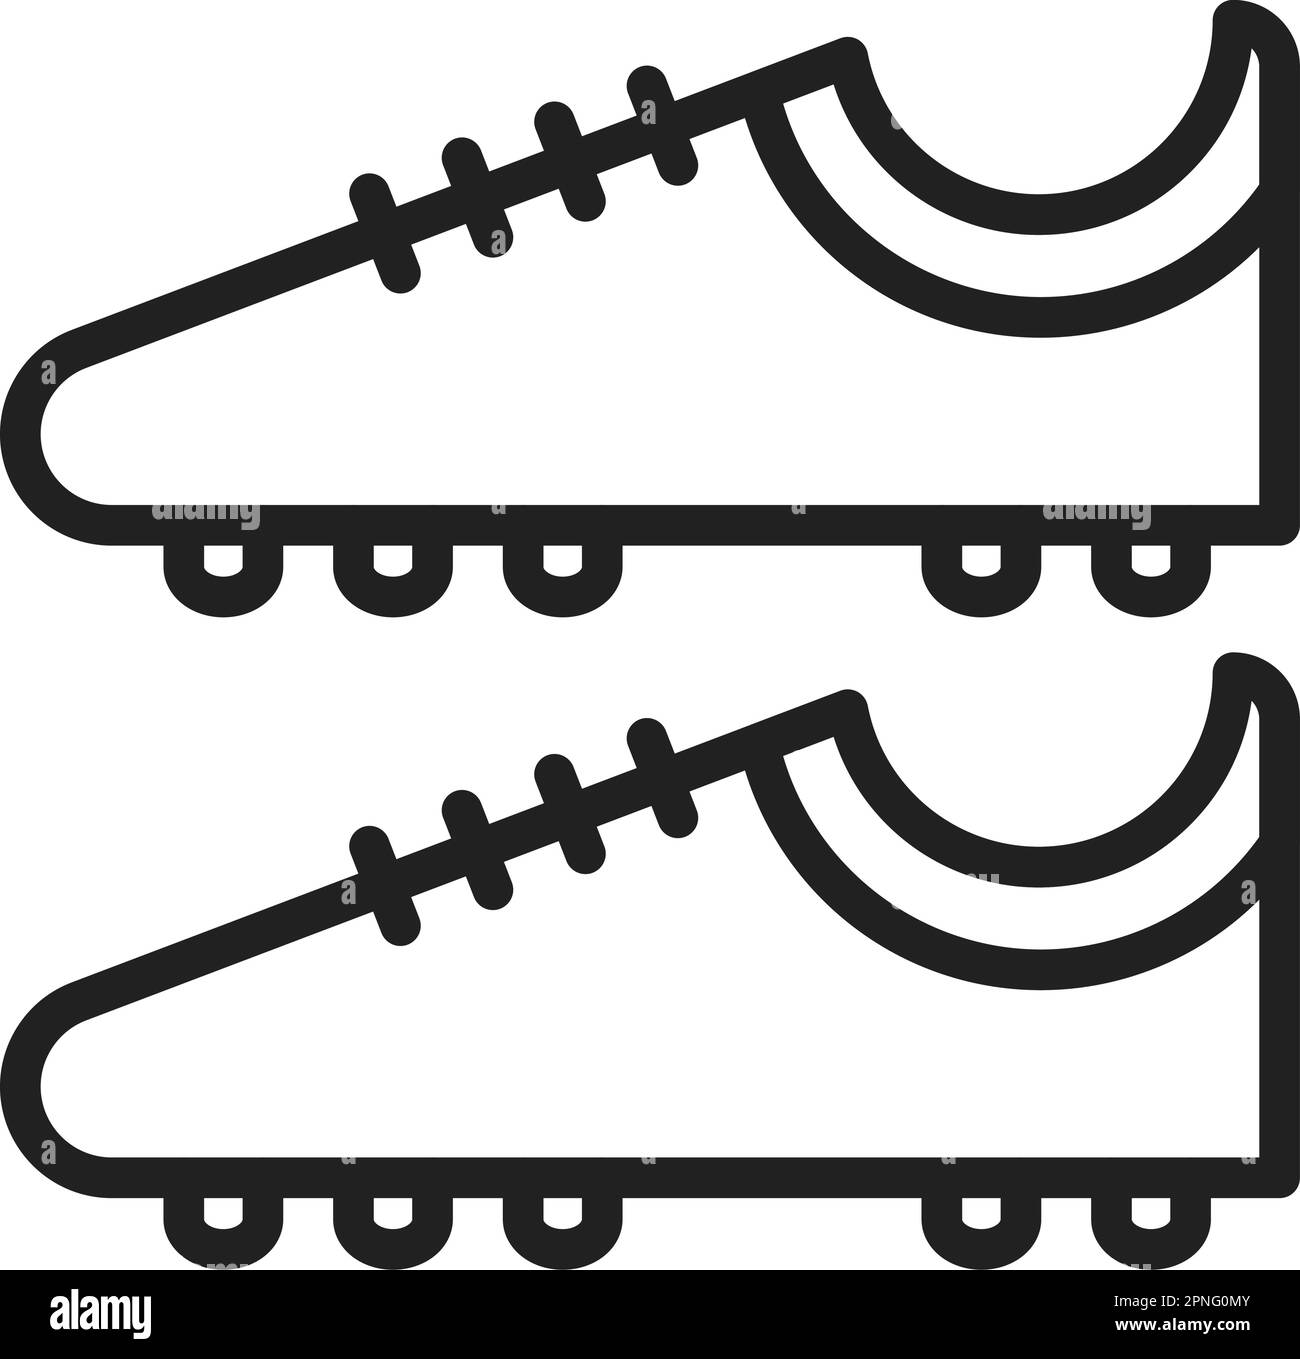 Soccer Boots icon vector image. Suitable for mobile apps, web apps and print media. Stock Vector